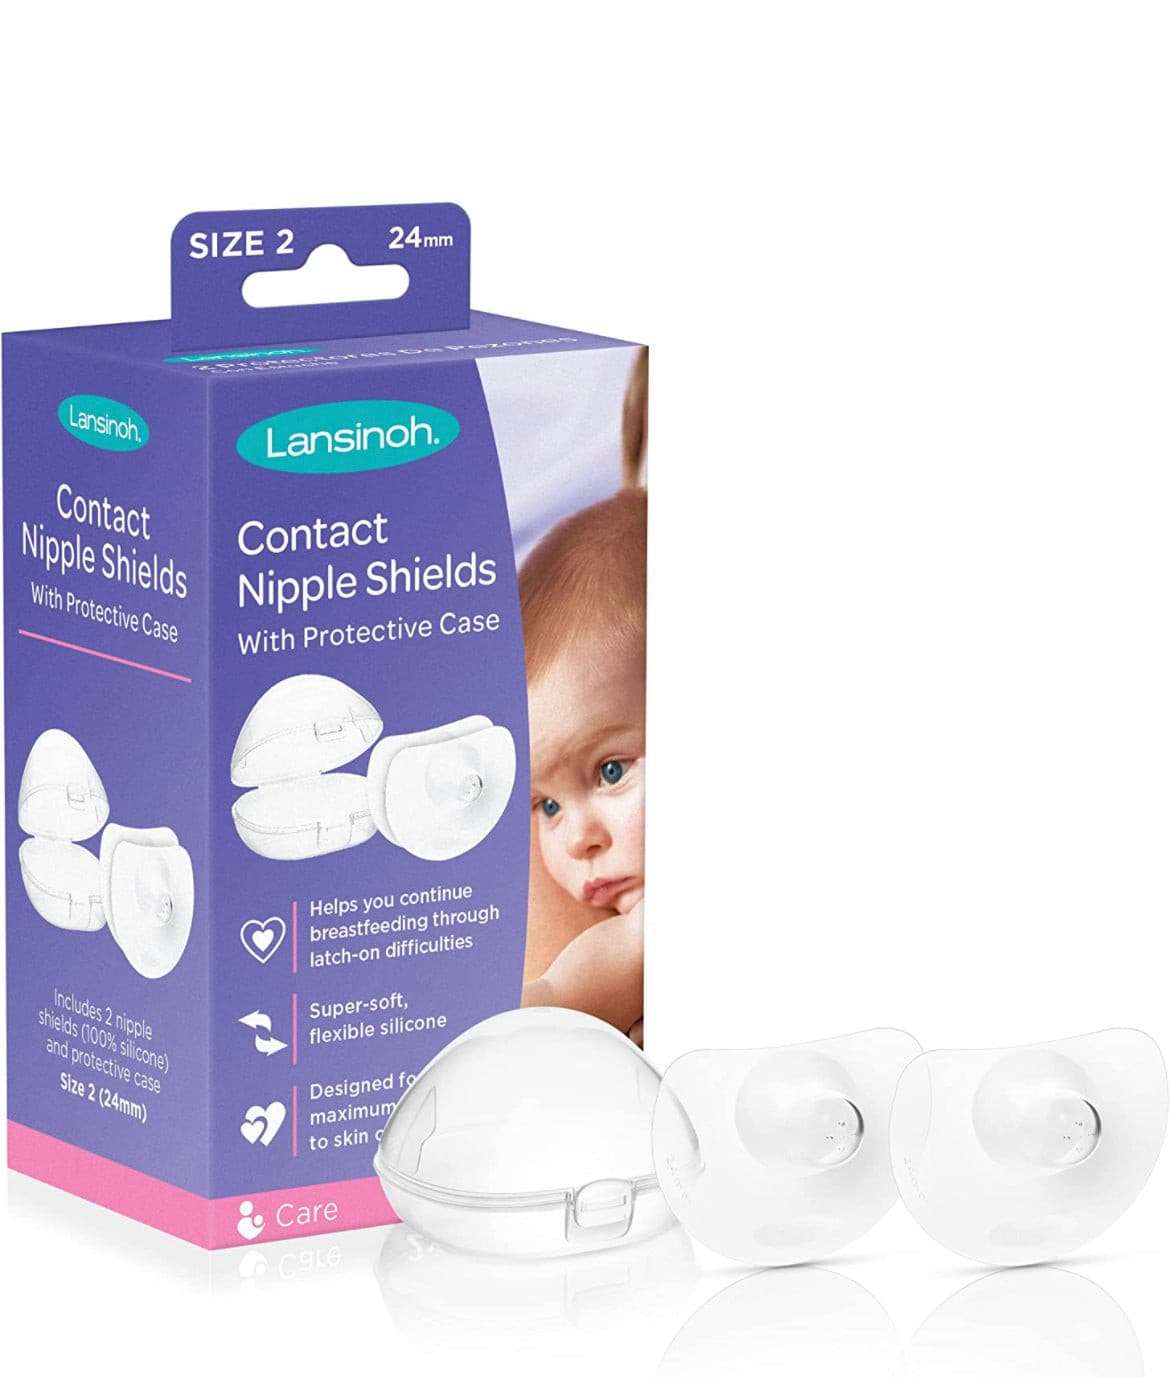 Contact Nipple Shields By Lansinoh.